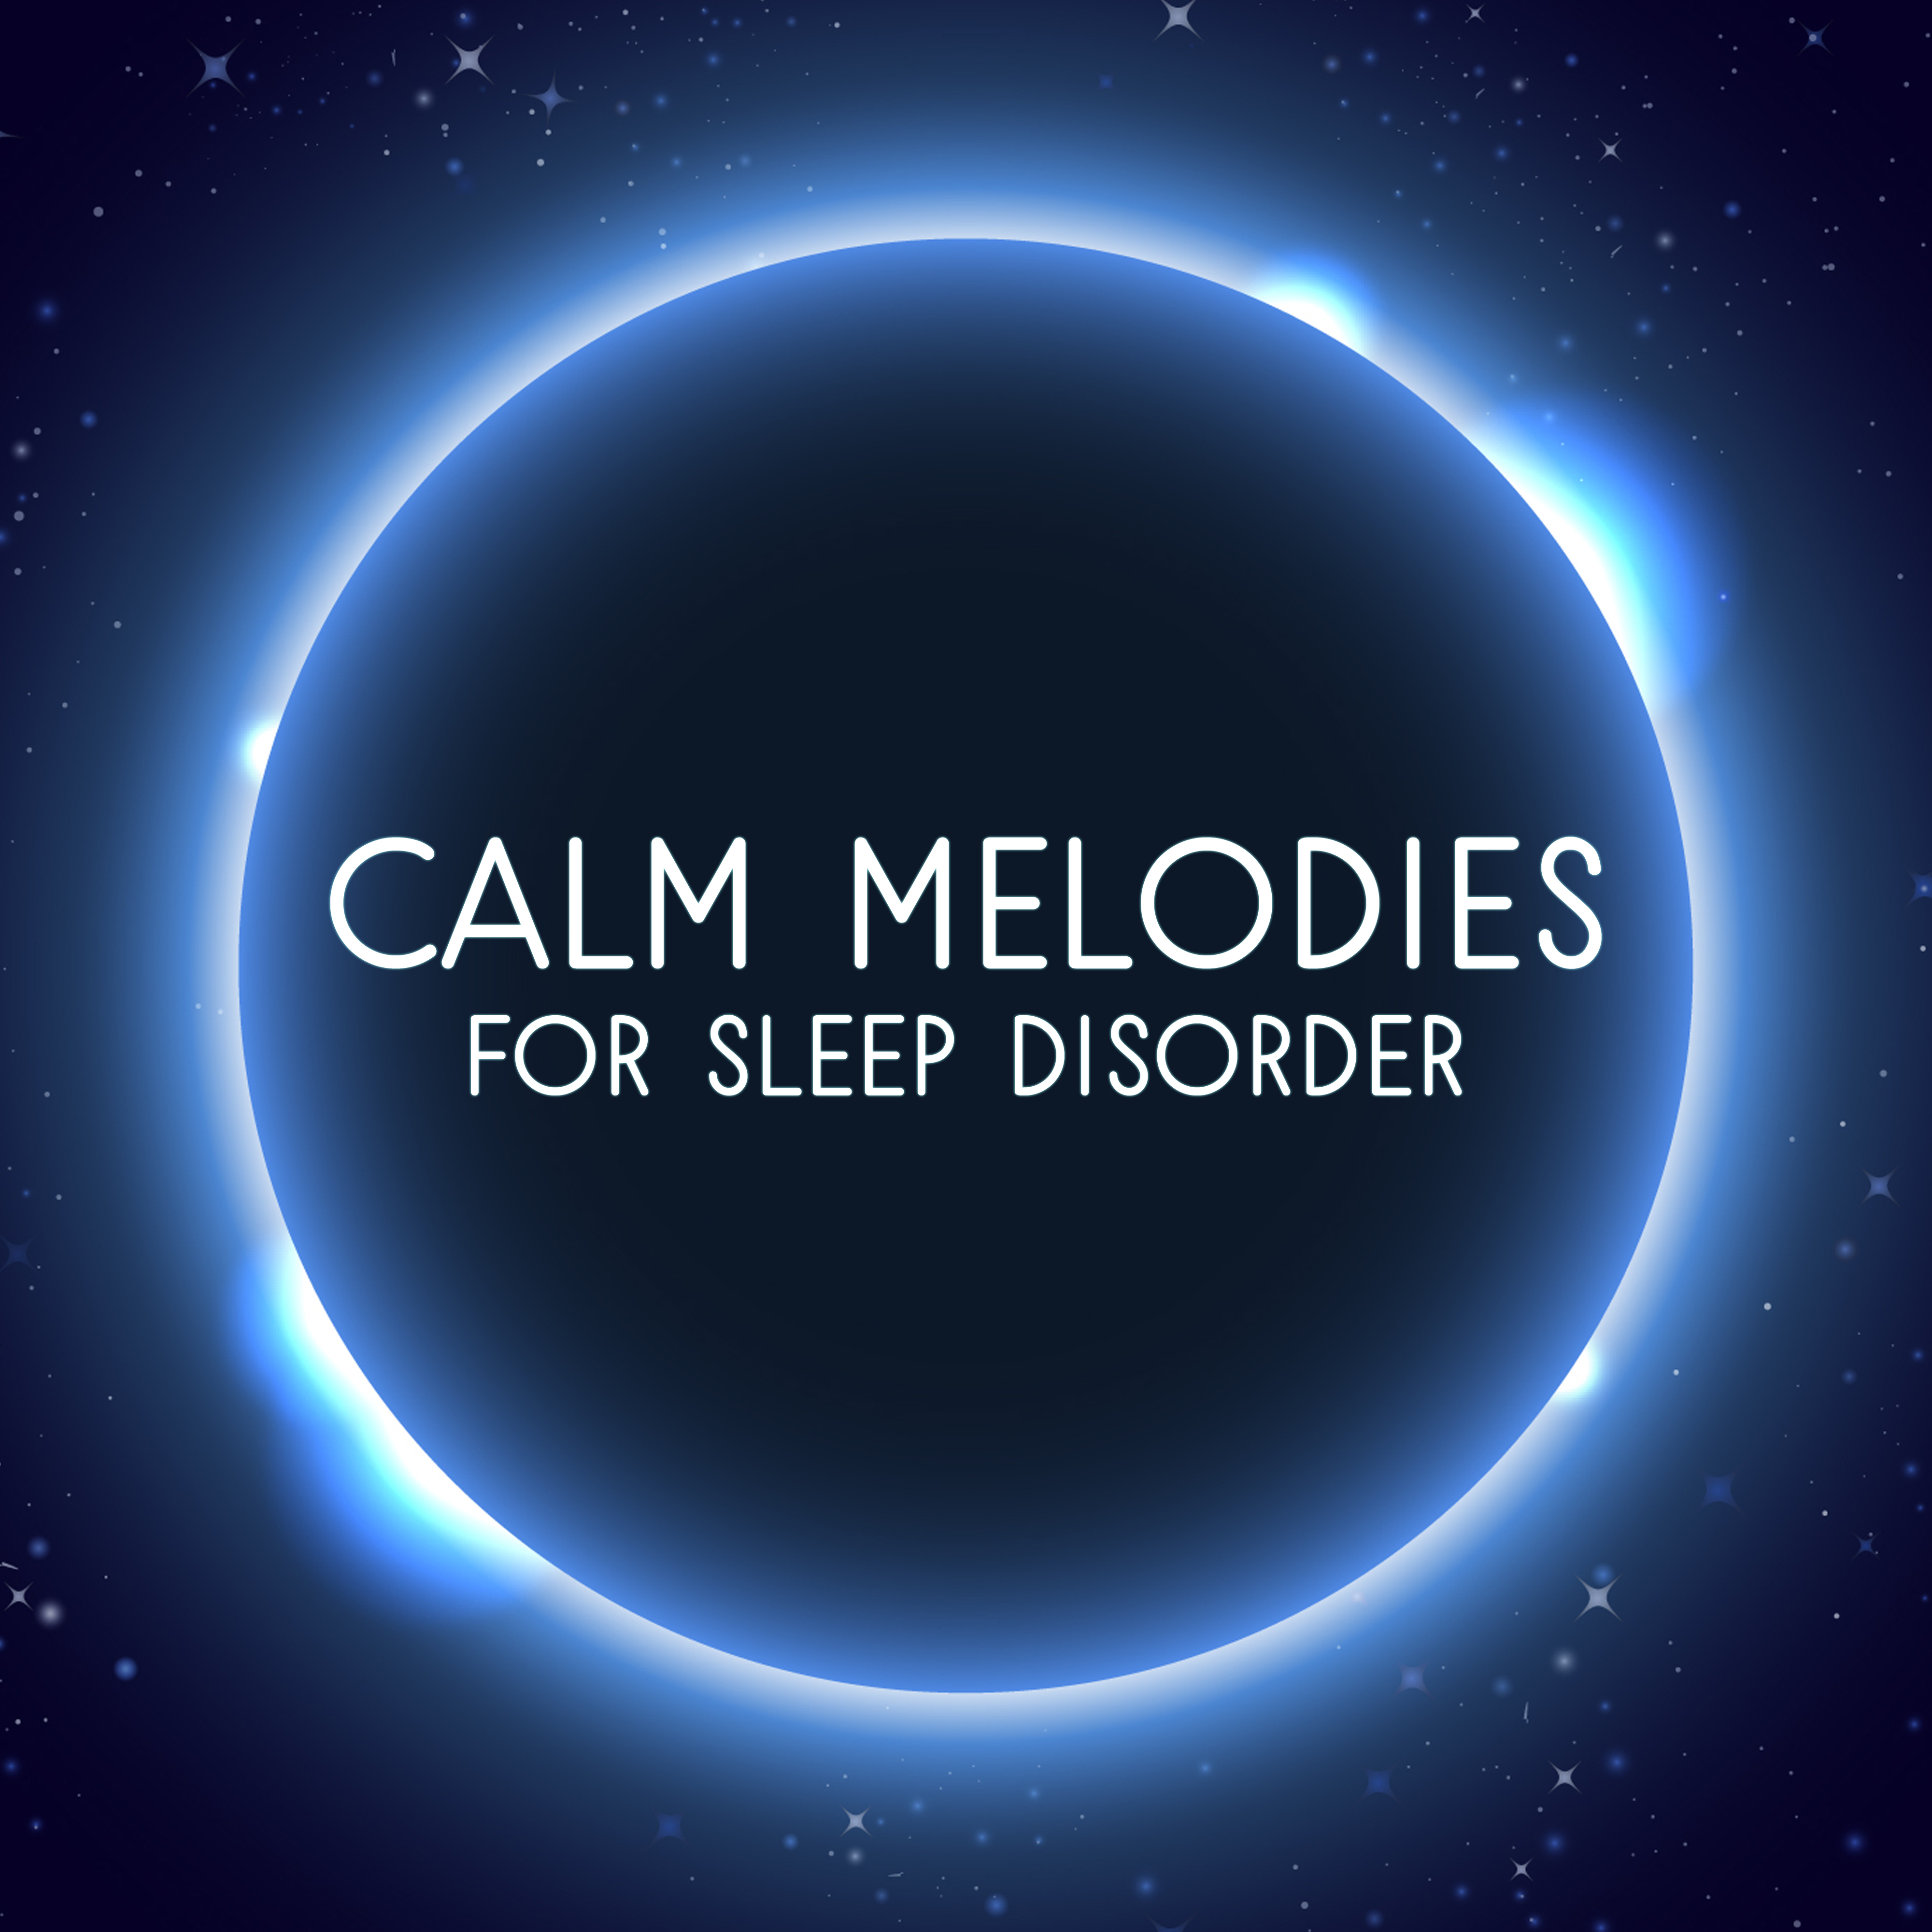 Calm Melodies for Sleep Disorder